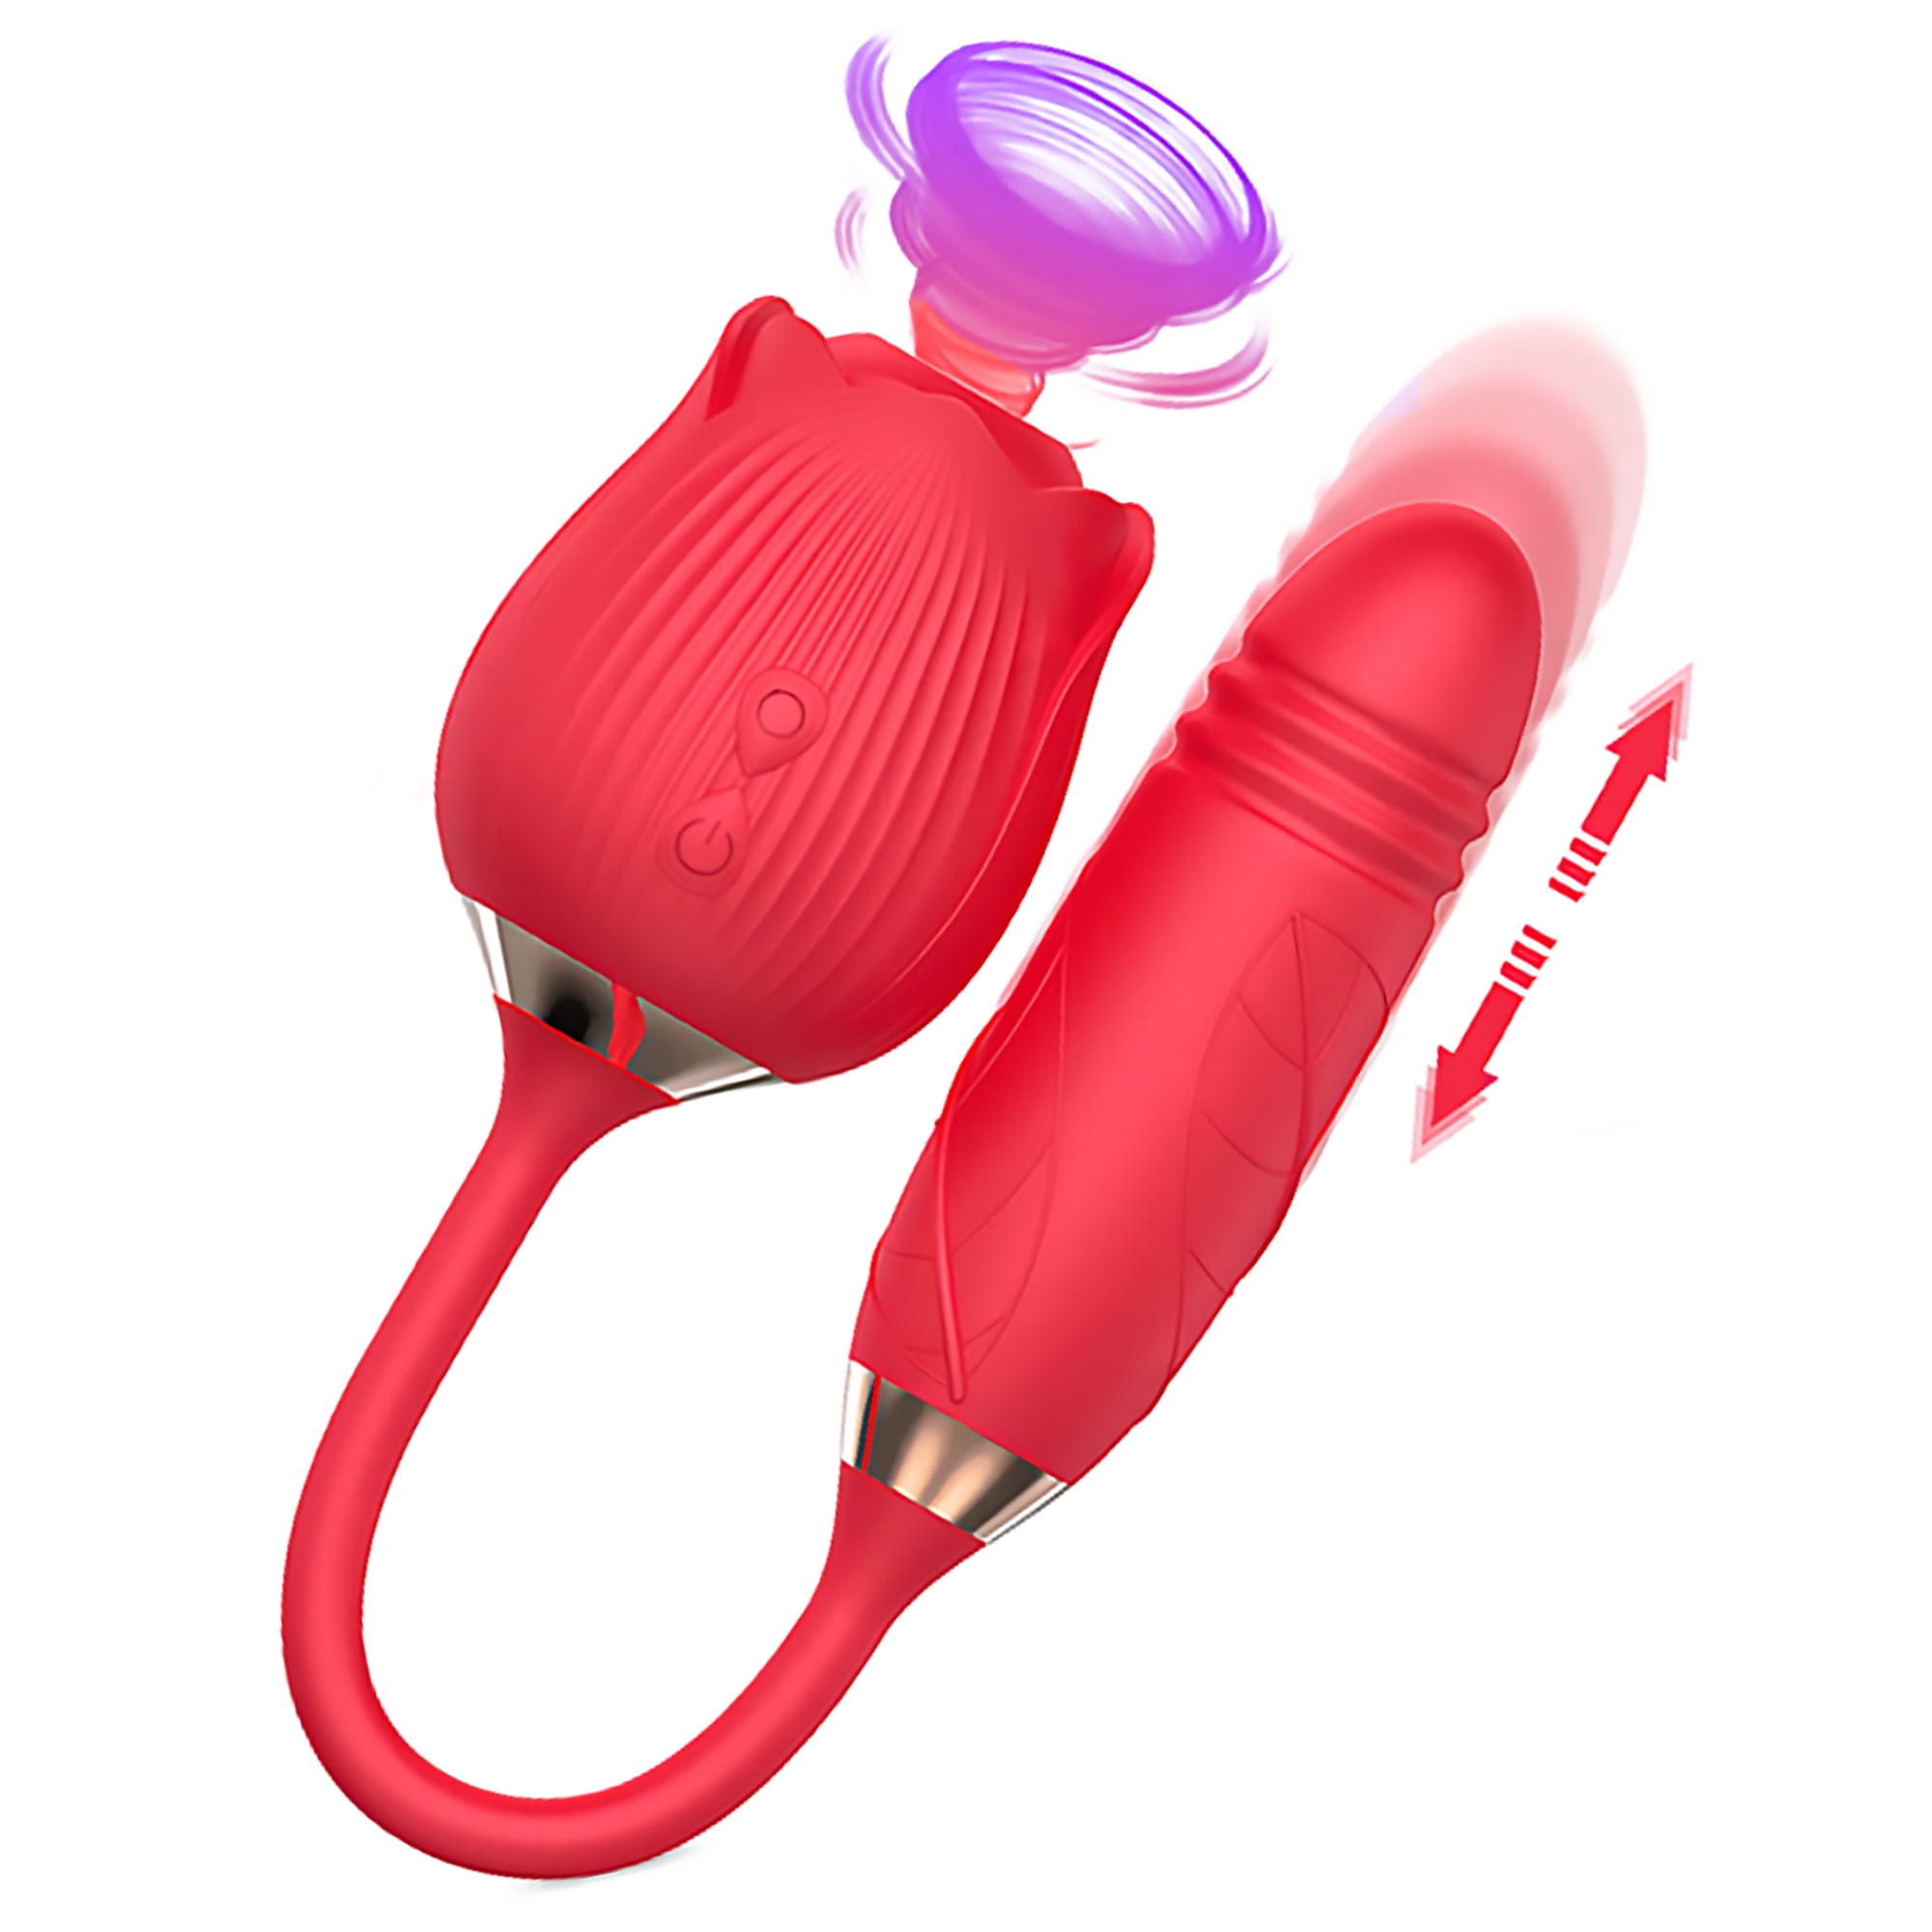 Vibrators and Adult Sex Toys for Women - Dual oral Stimulator with Vibrating Egg for Woman Couples, photo